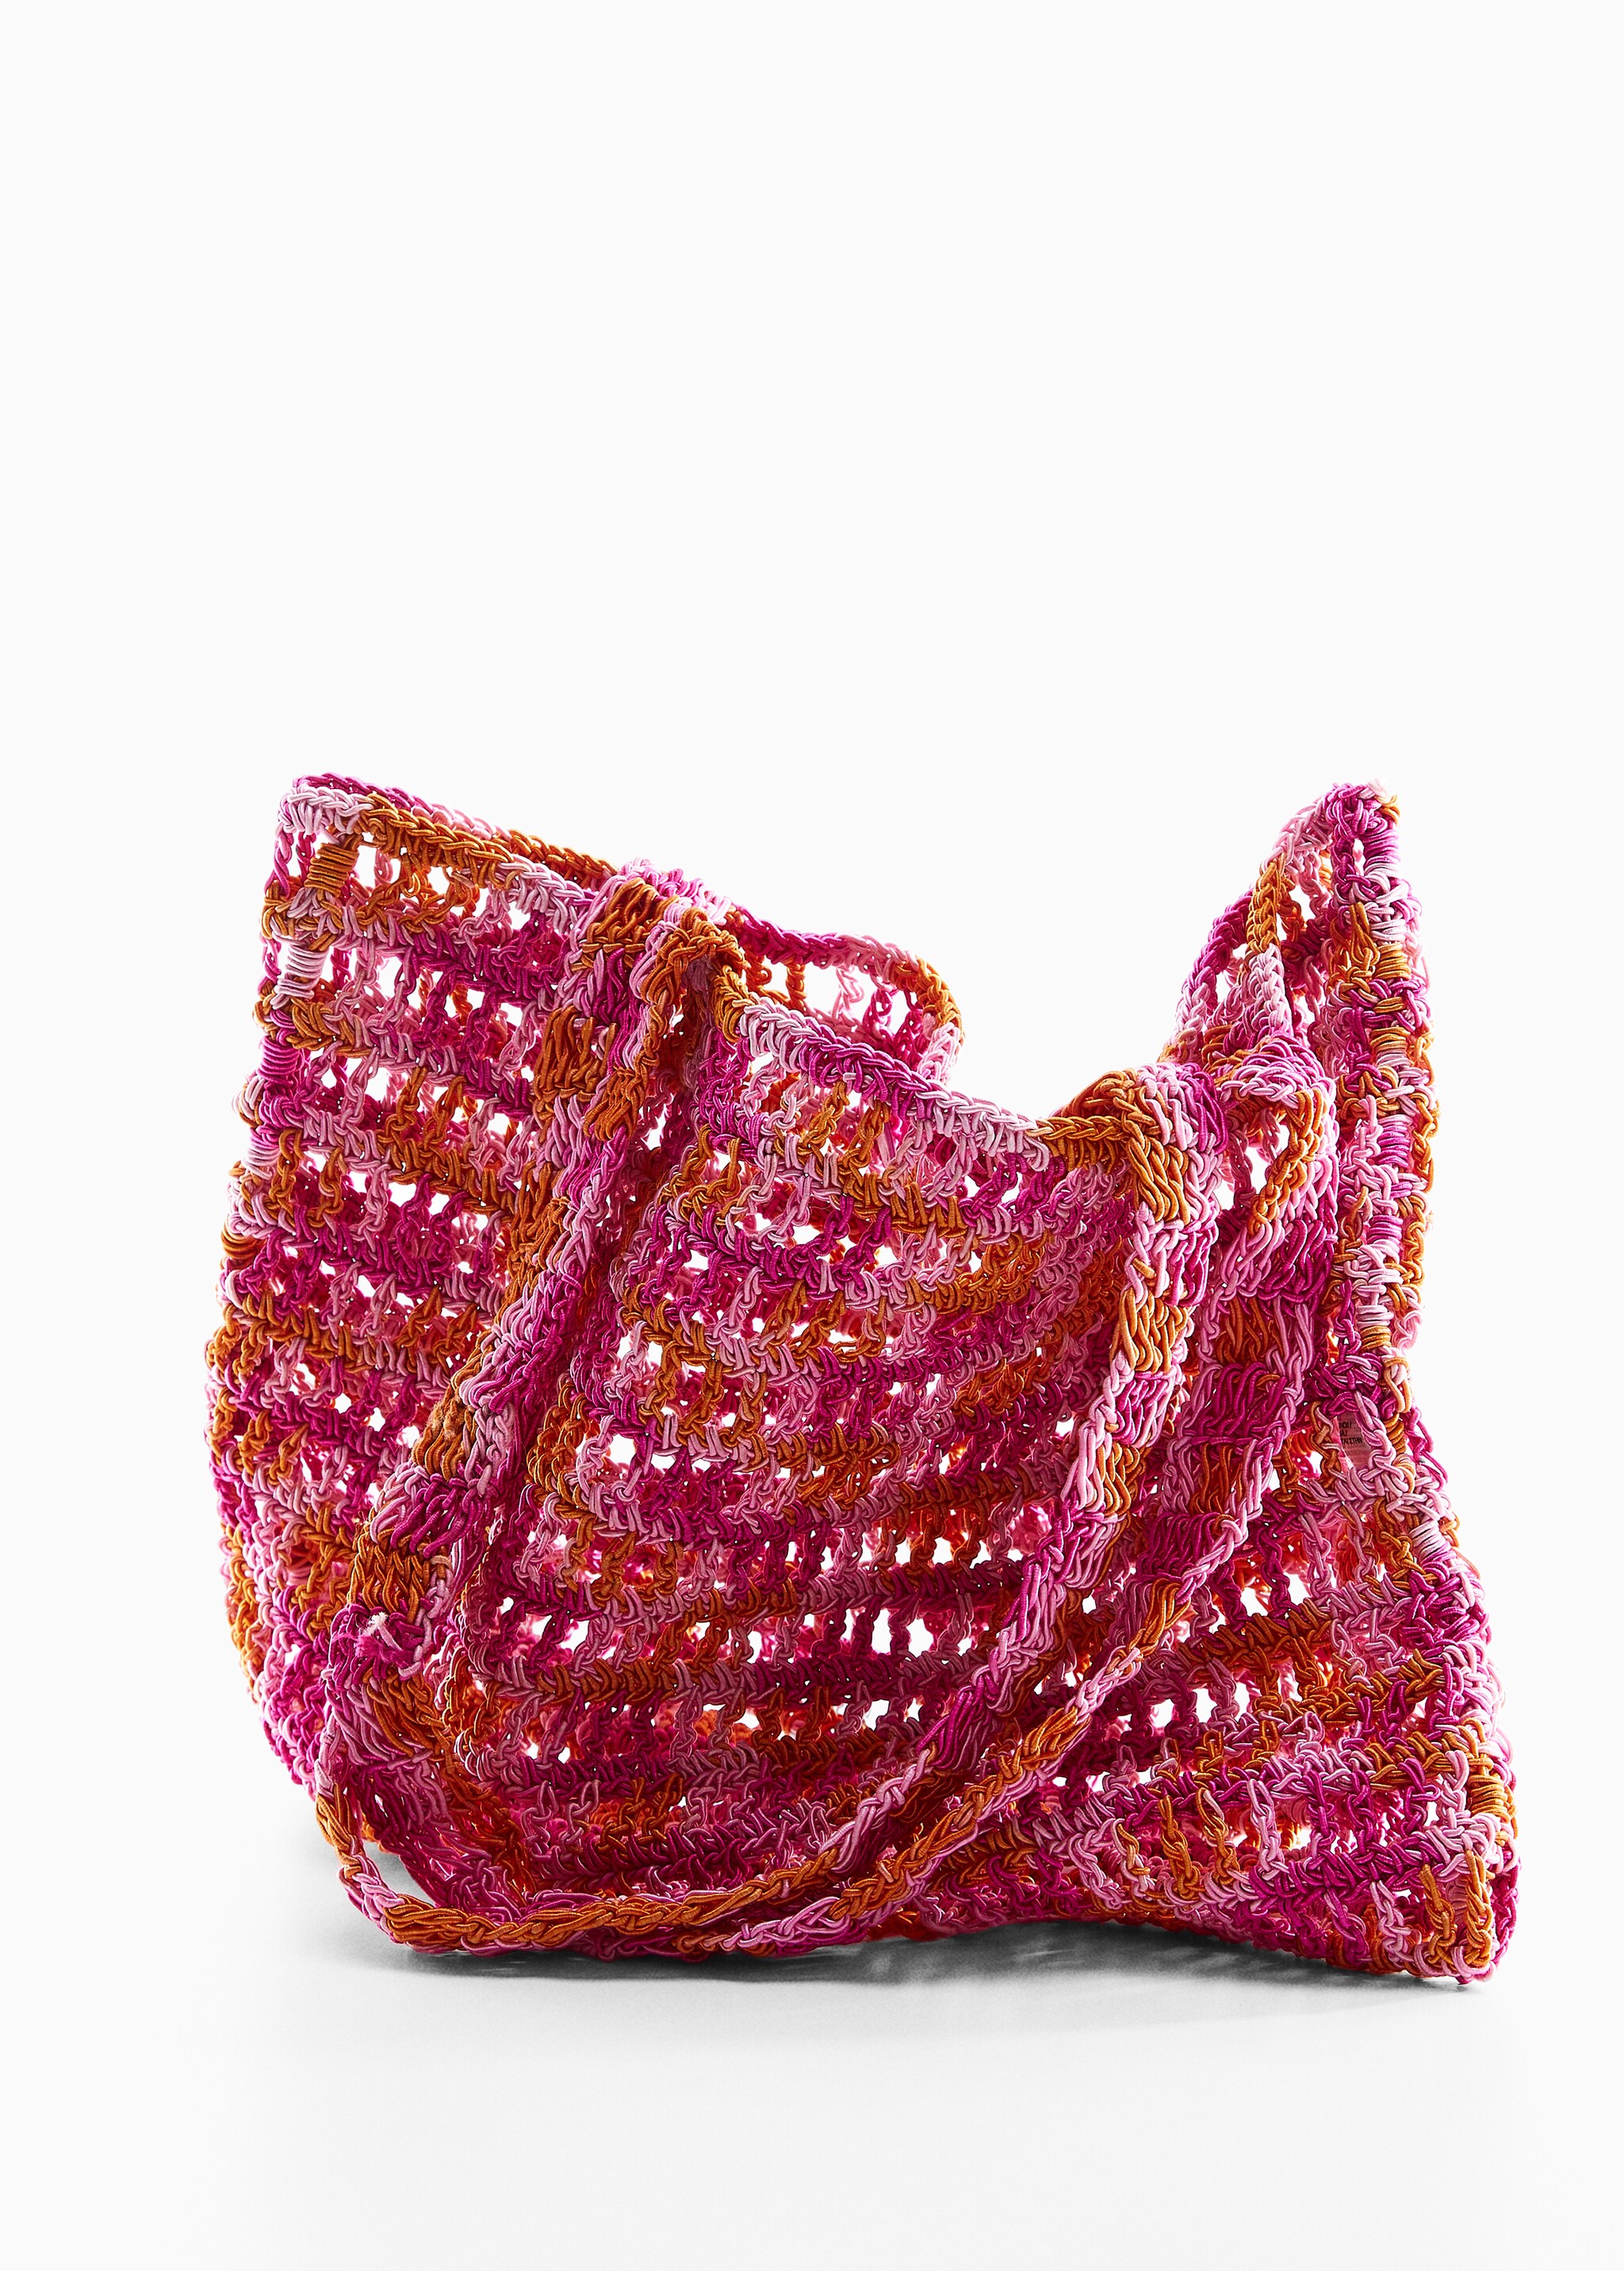 Braided net bag - Details of the article 5